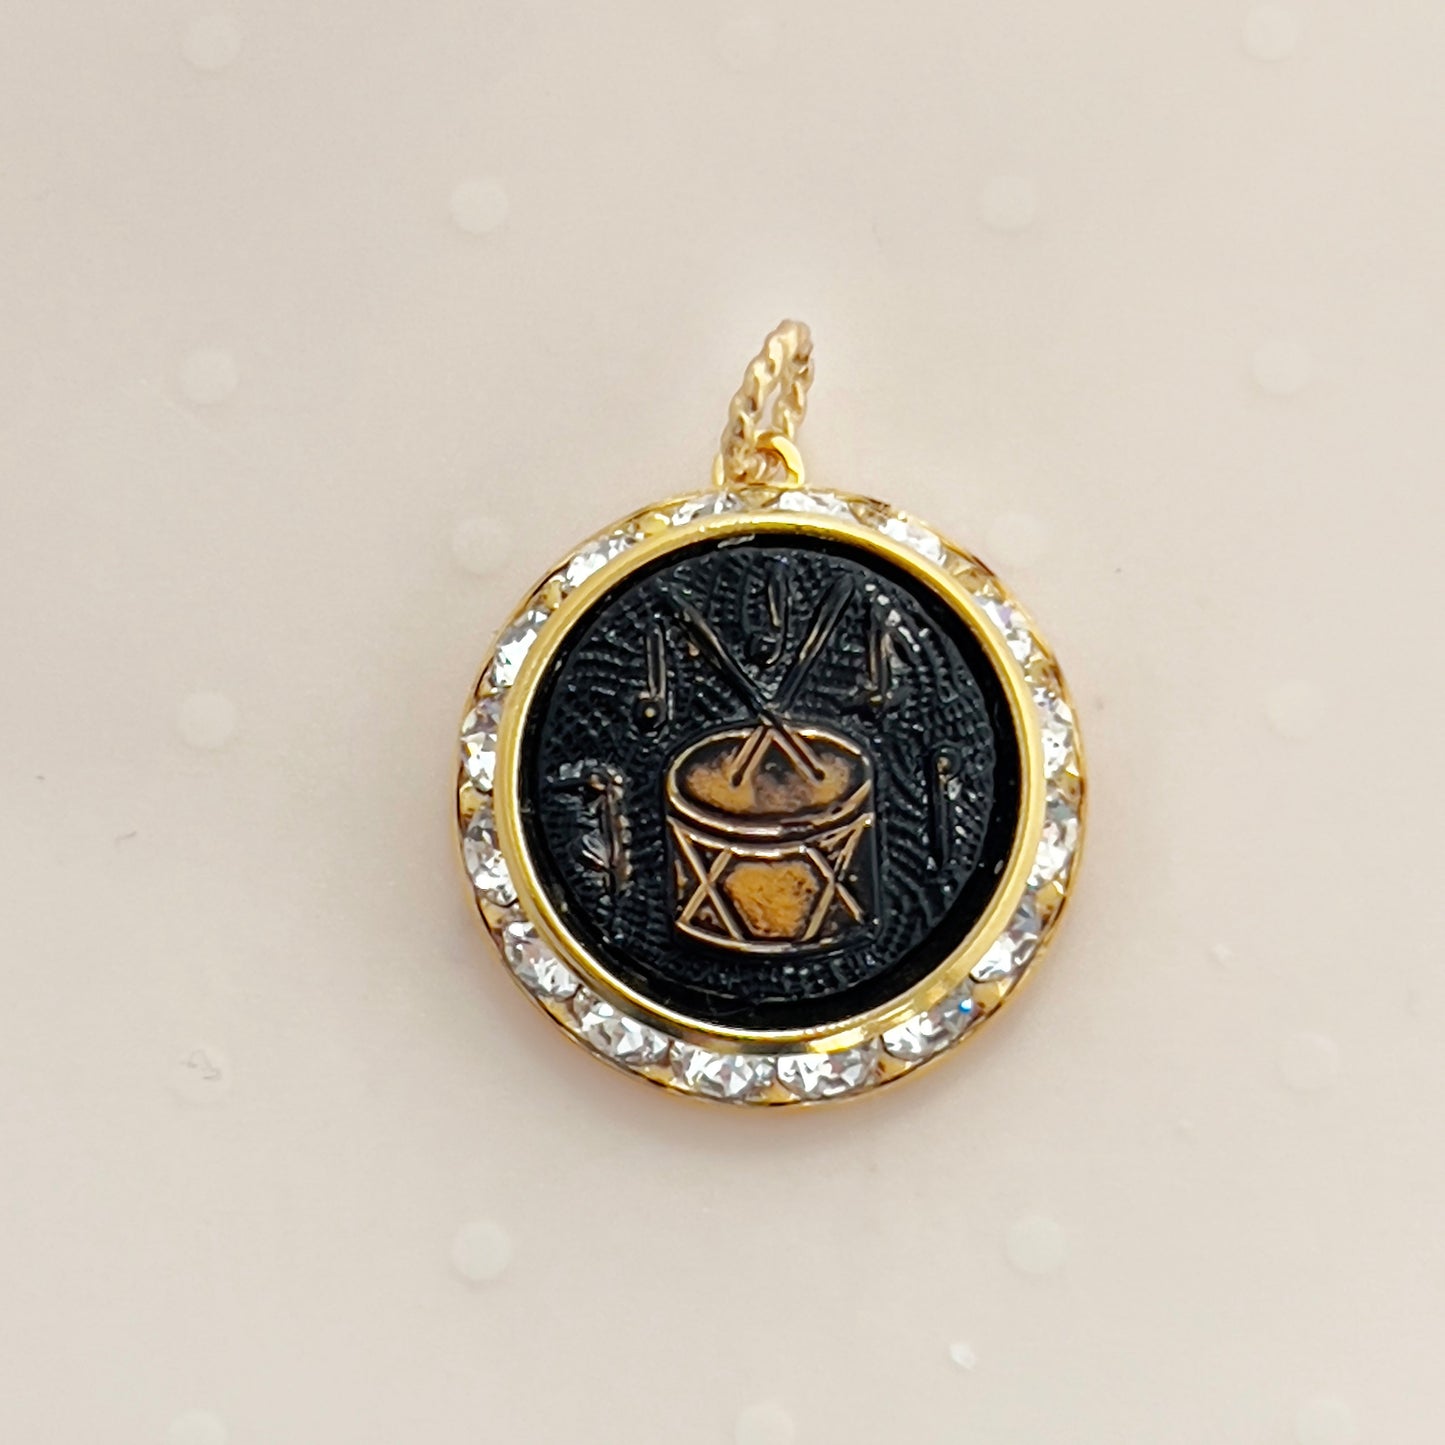 Vintage Music Theme Button Pendant, Gold and Black Glass Drum Pendant, Unique Cameo Jewelry Gifts for Women